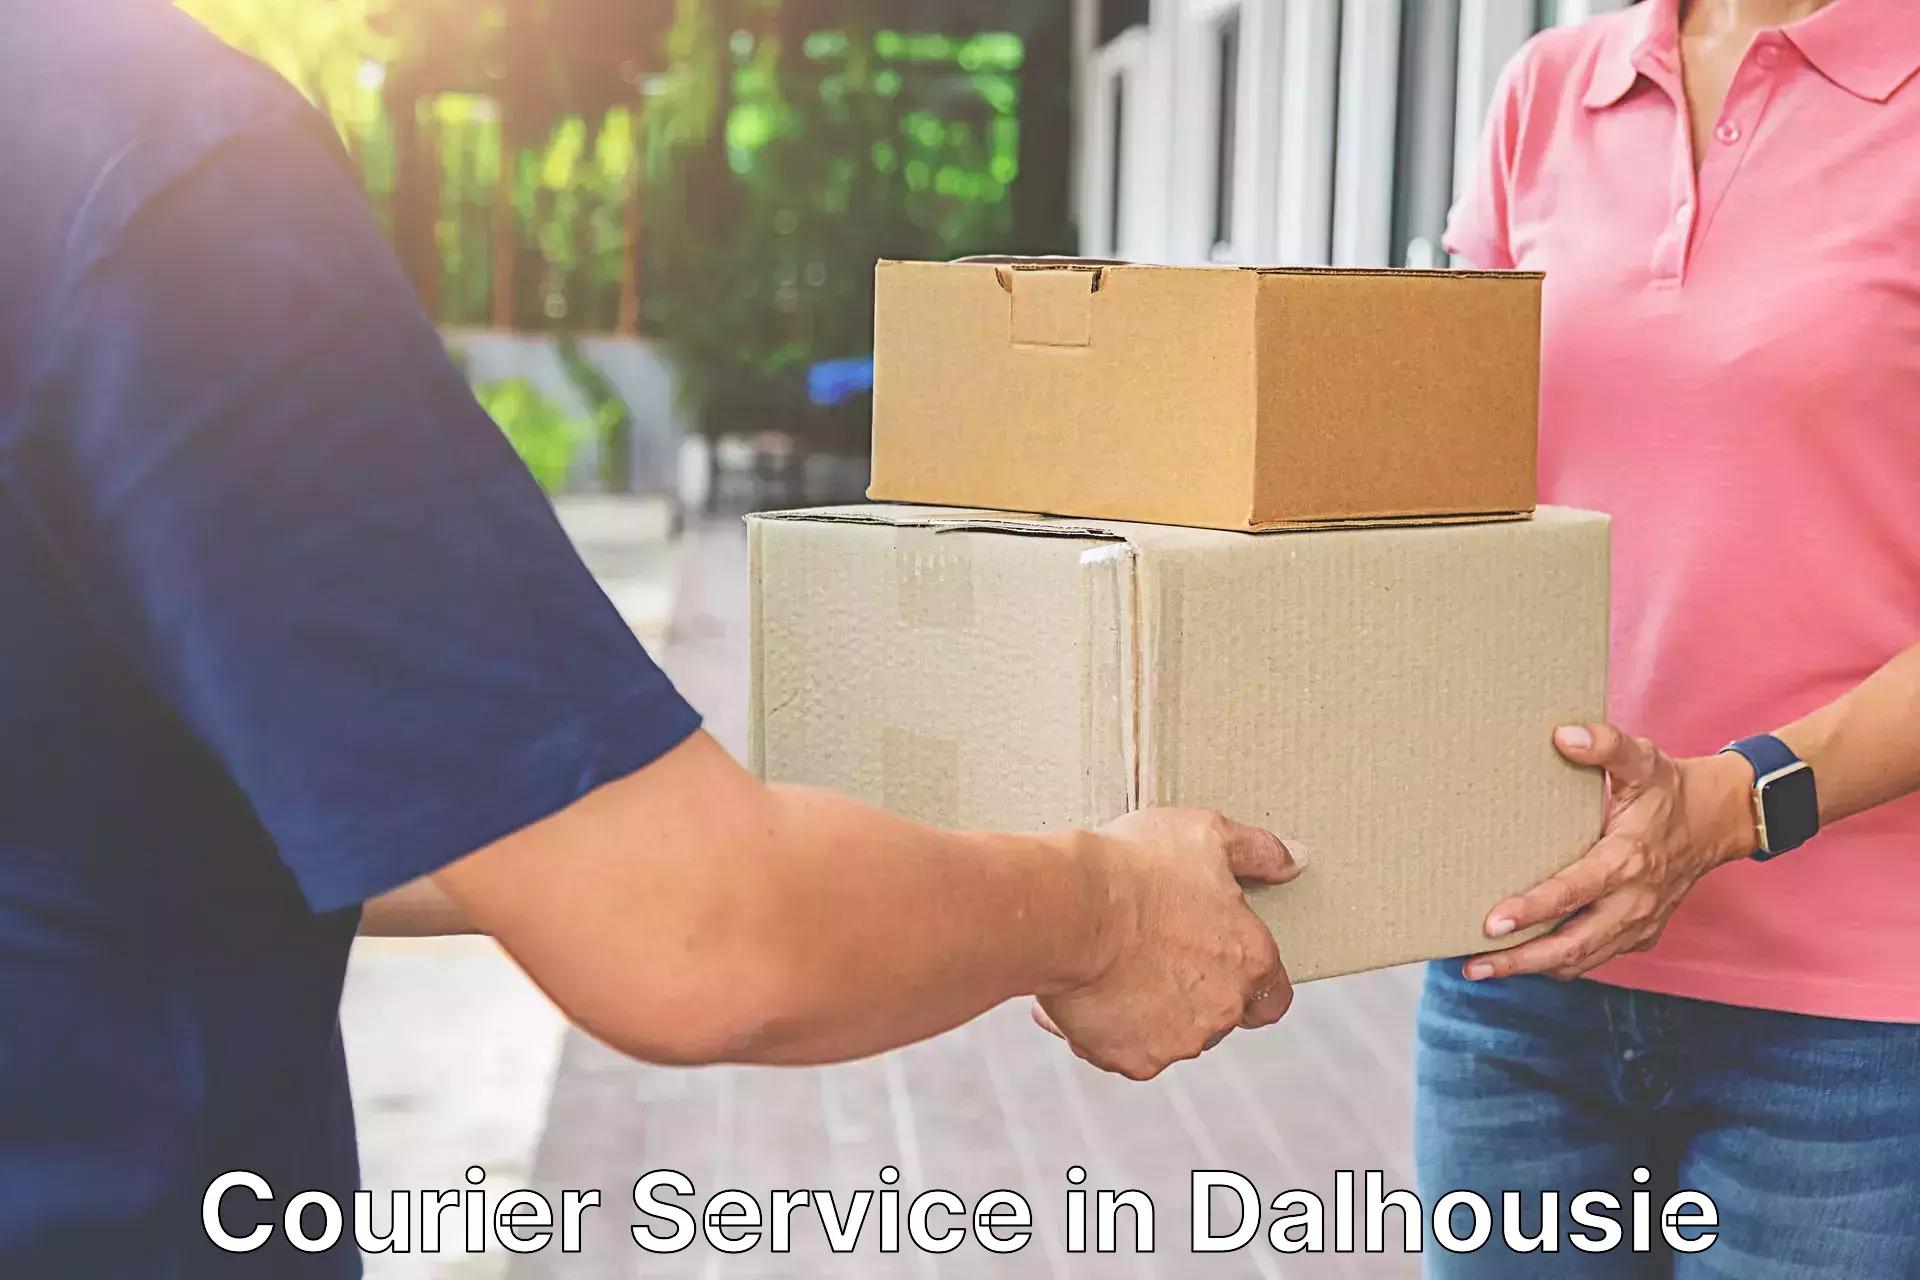 Rural area delivery in Dalhousie